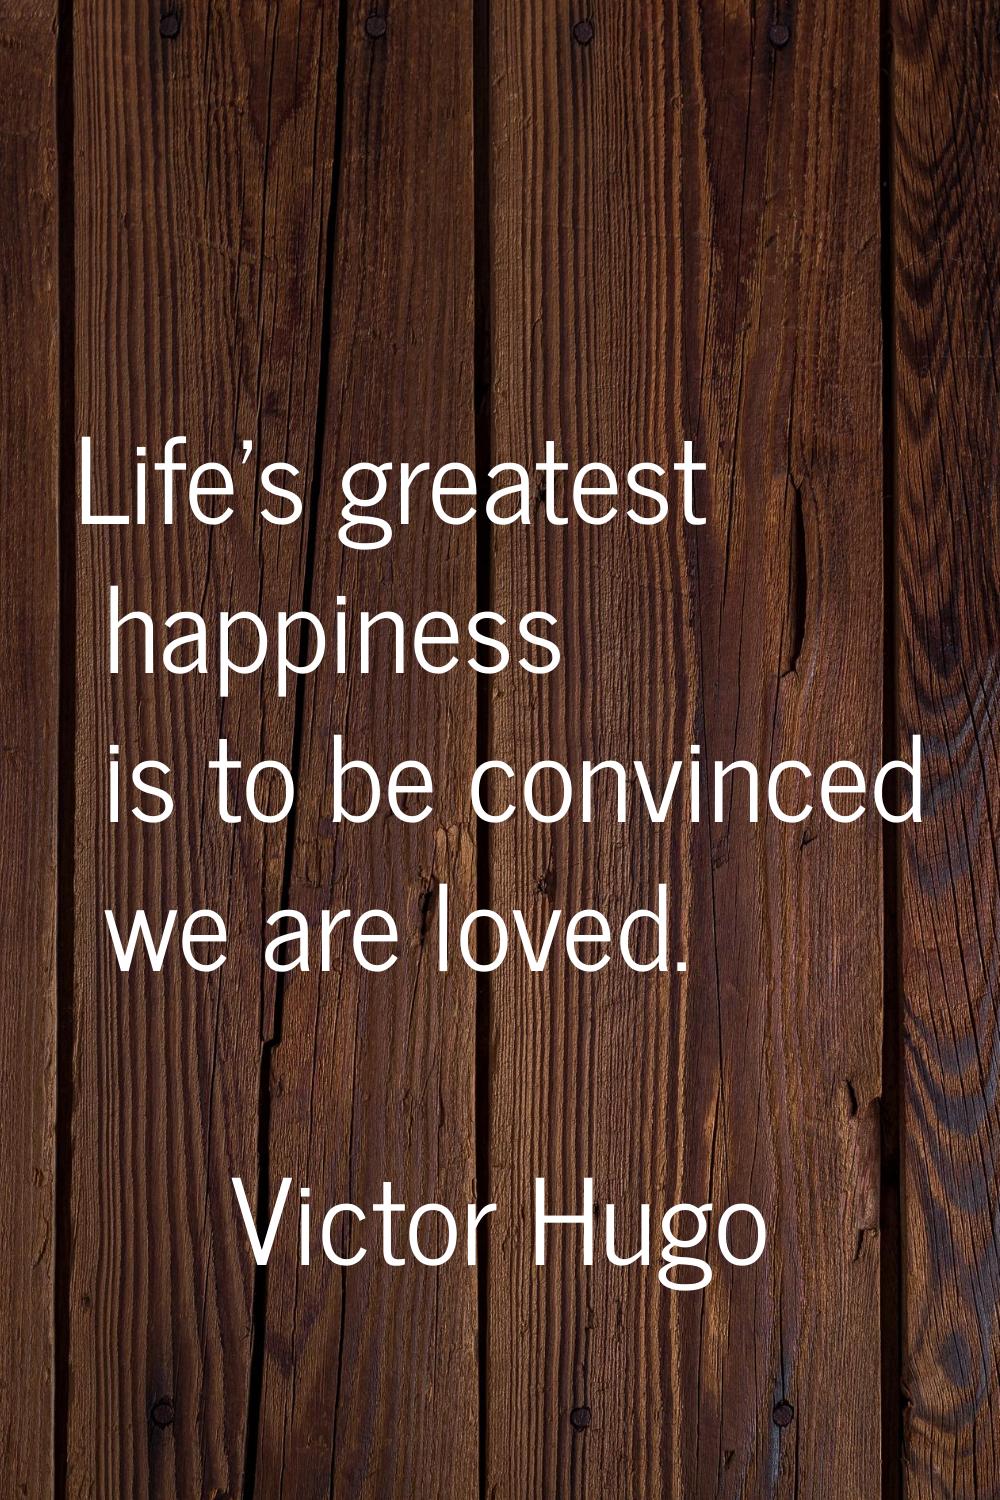 Life's greatest happiness is to be convinced we are loved.